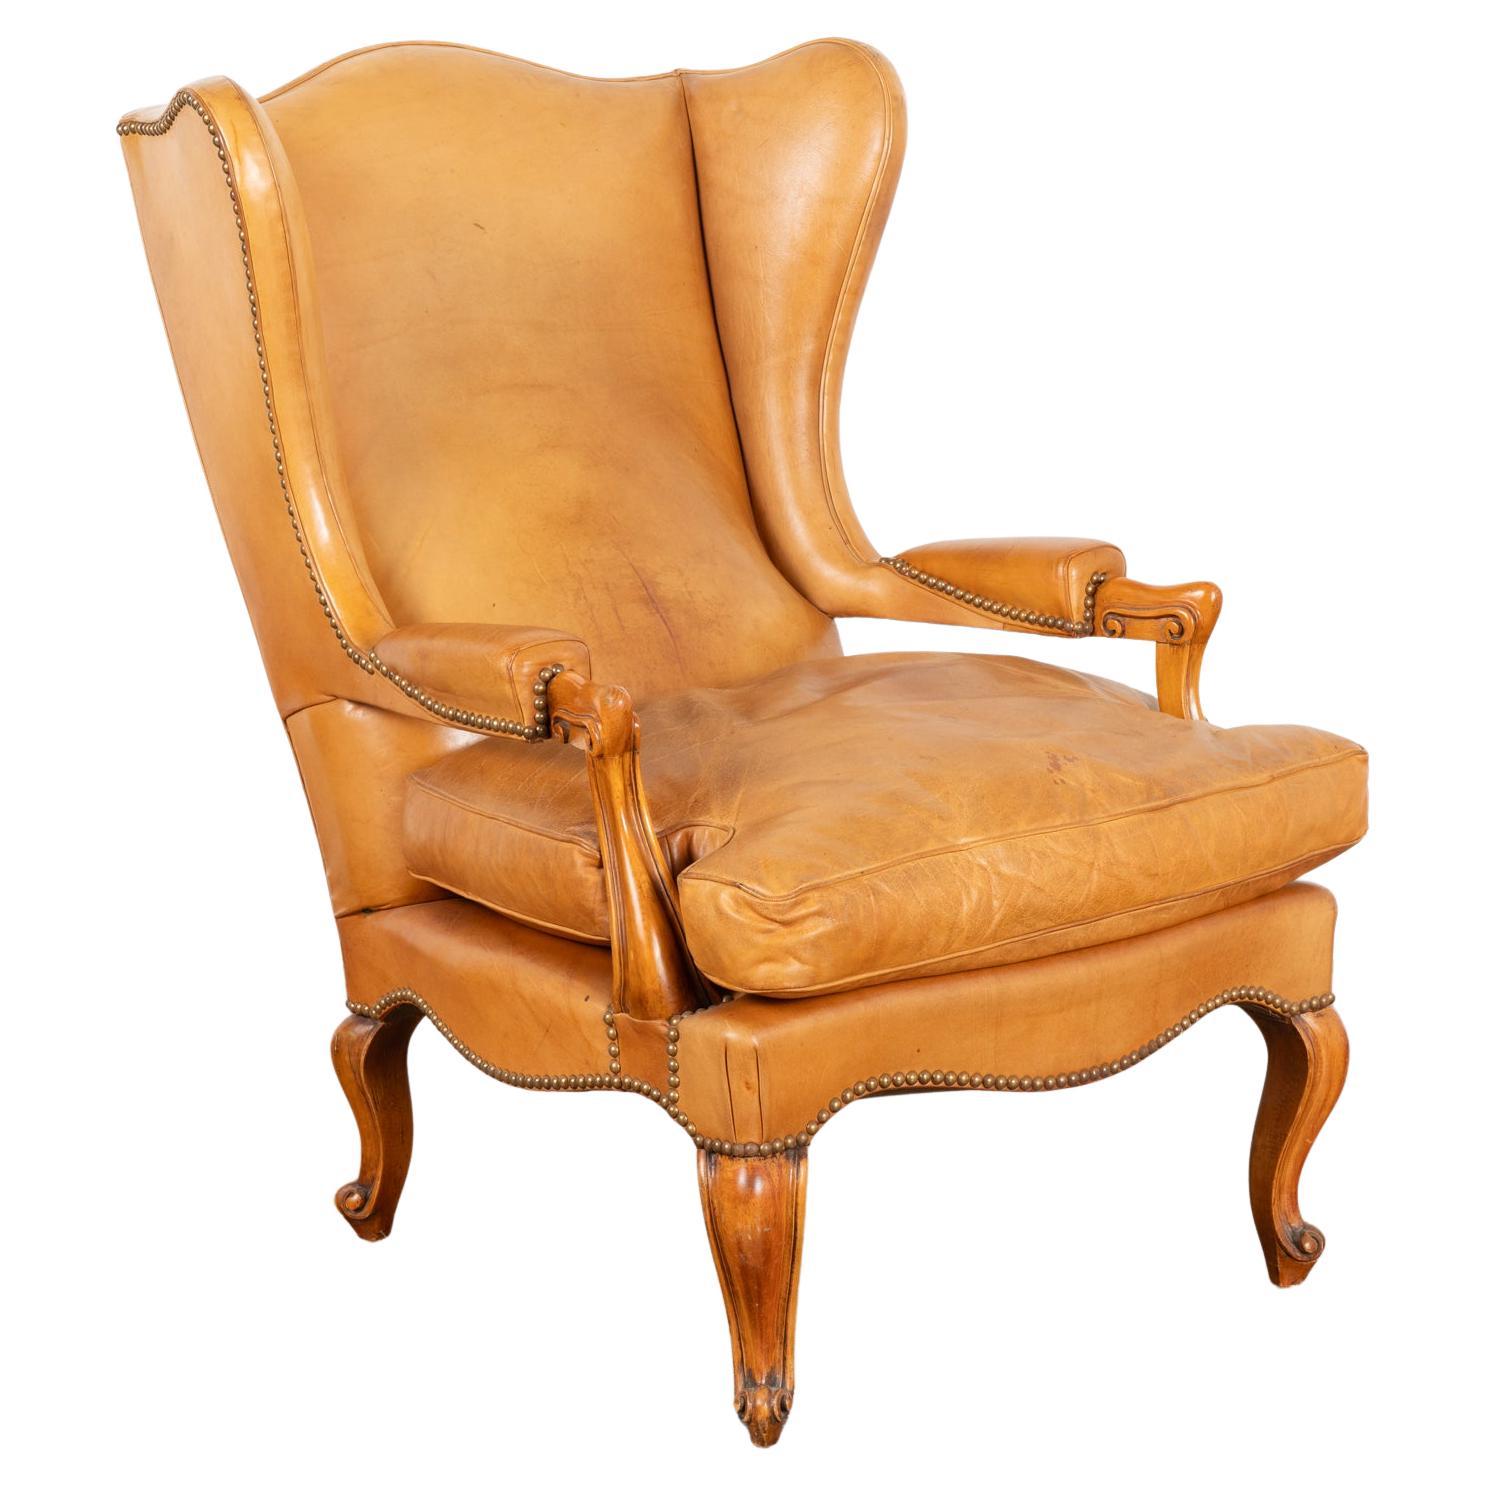 Vintage Camel Colored Leather Wingback Armchair, Denmark circa 1940 For Sale